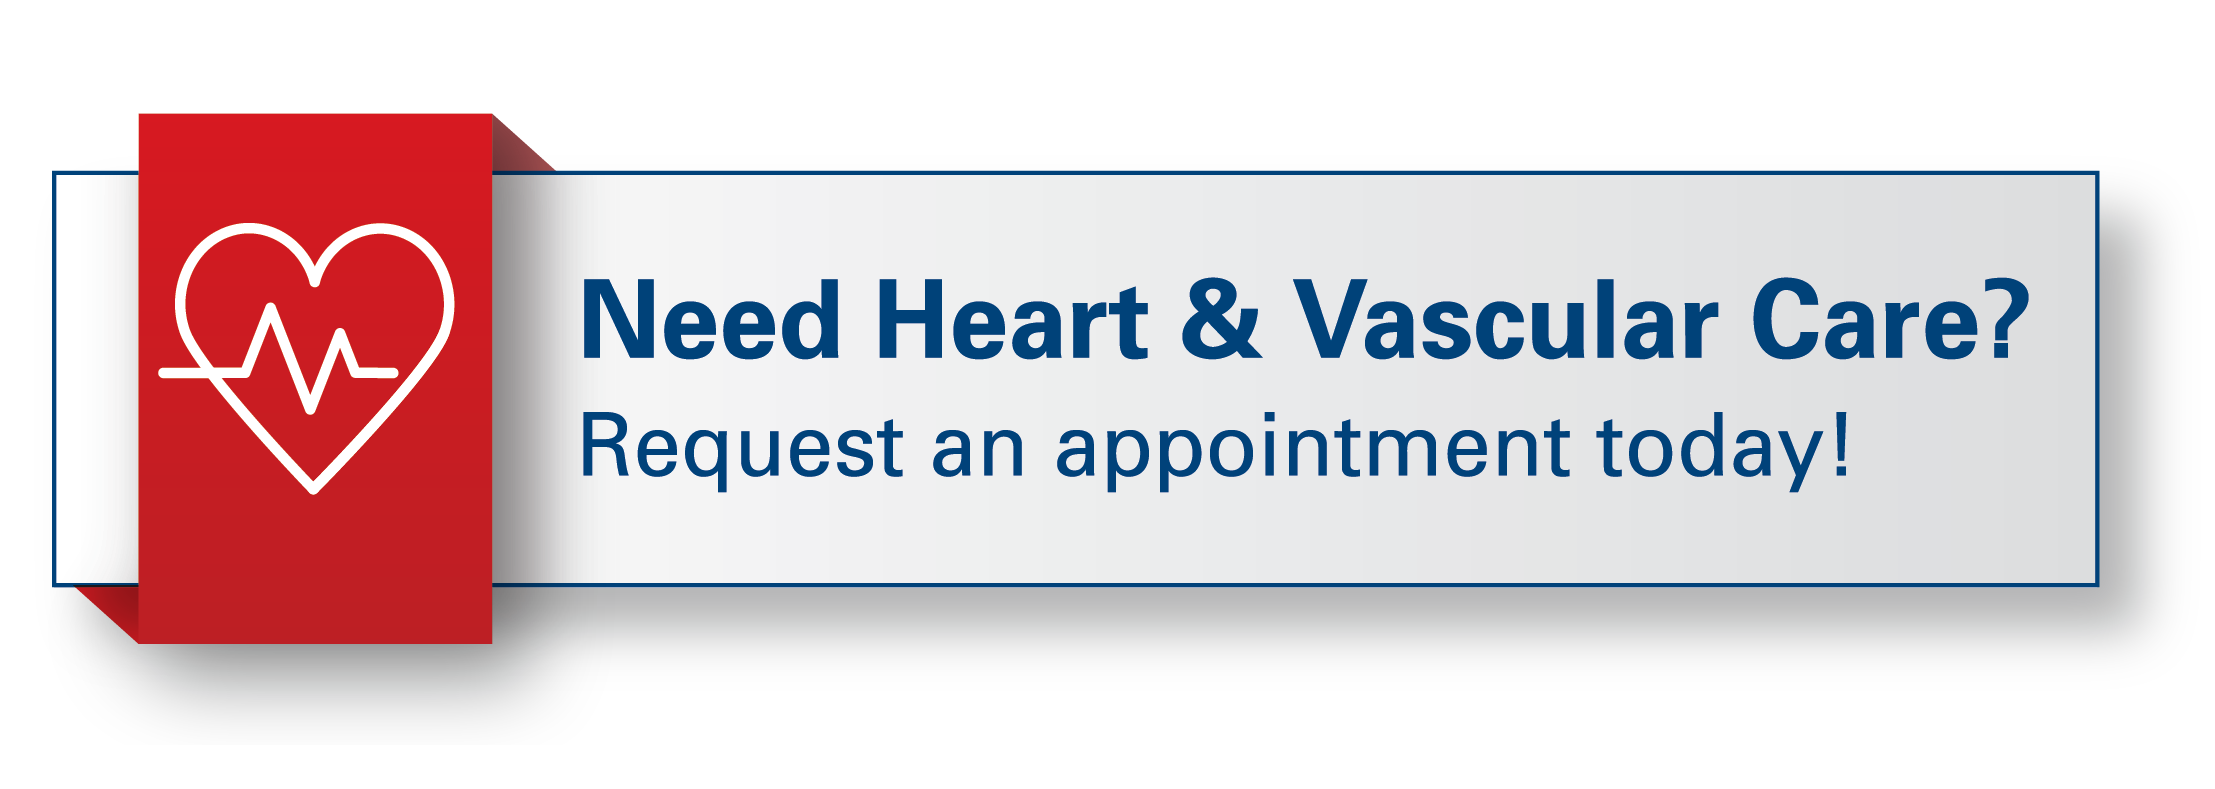 Heart & Vascular - Request an Appointment